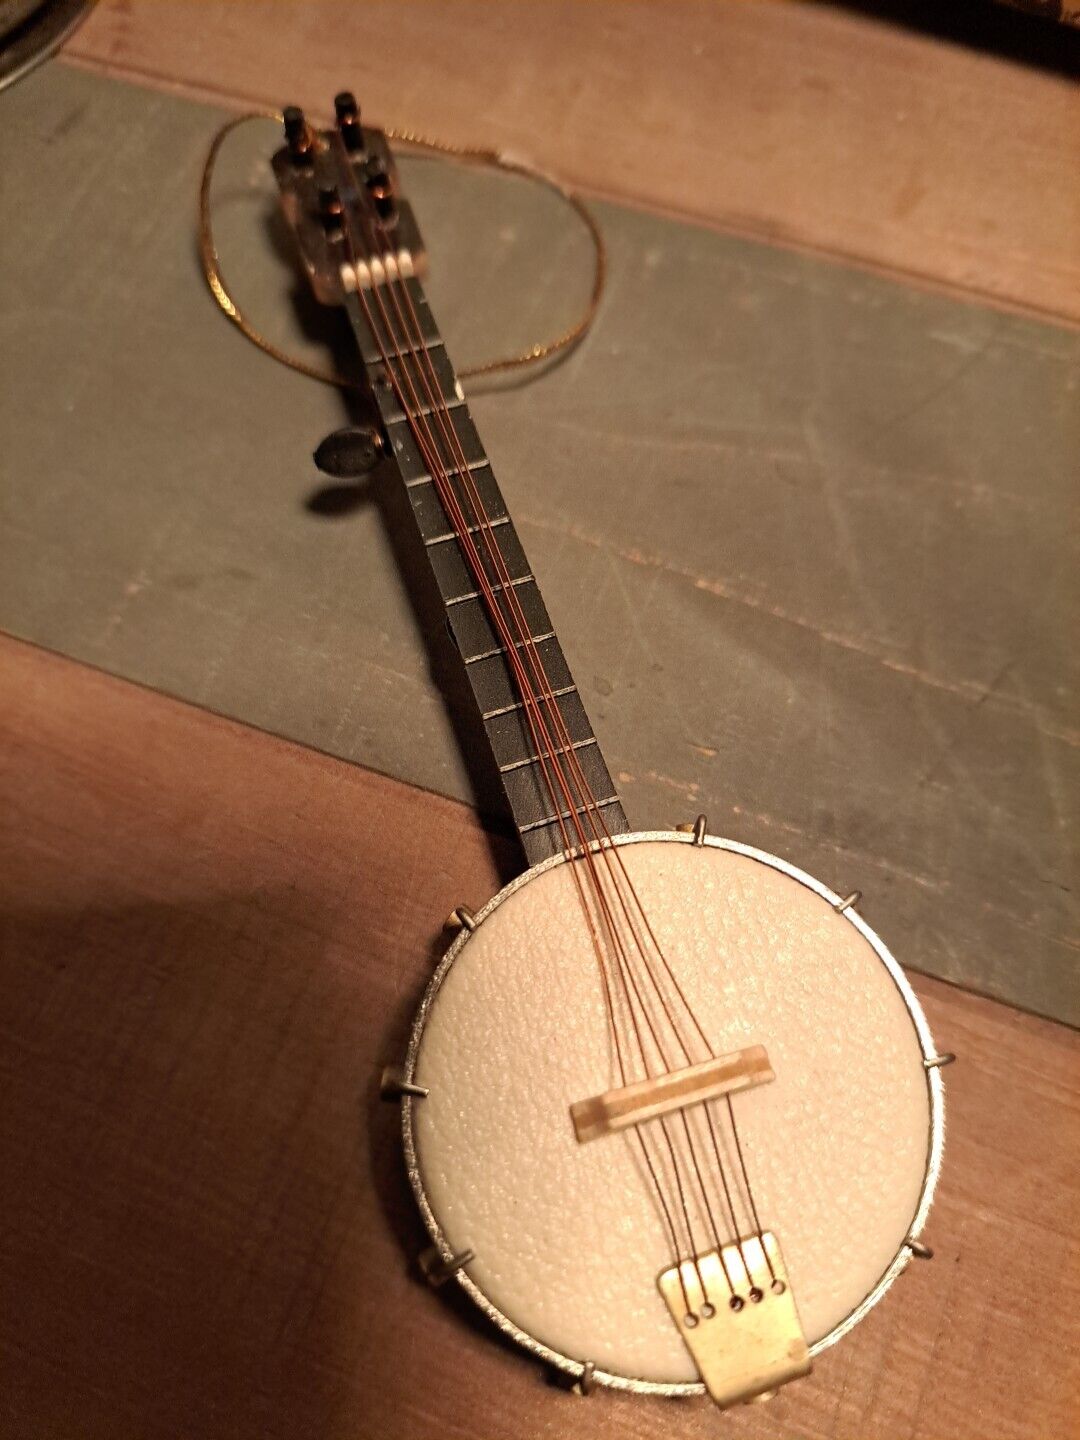  5 In. Banjo Handcrafted Instrument Ornament. Real Wood Body And Leather Head